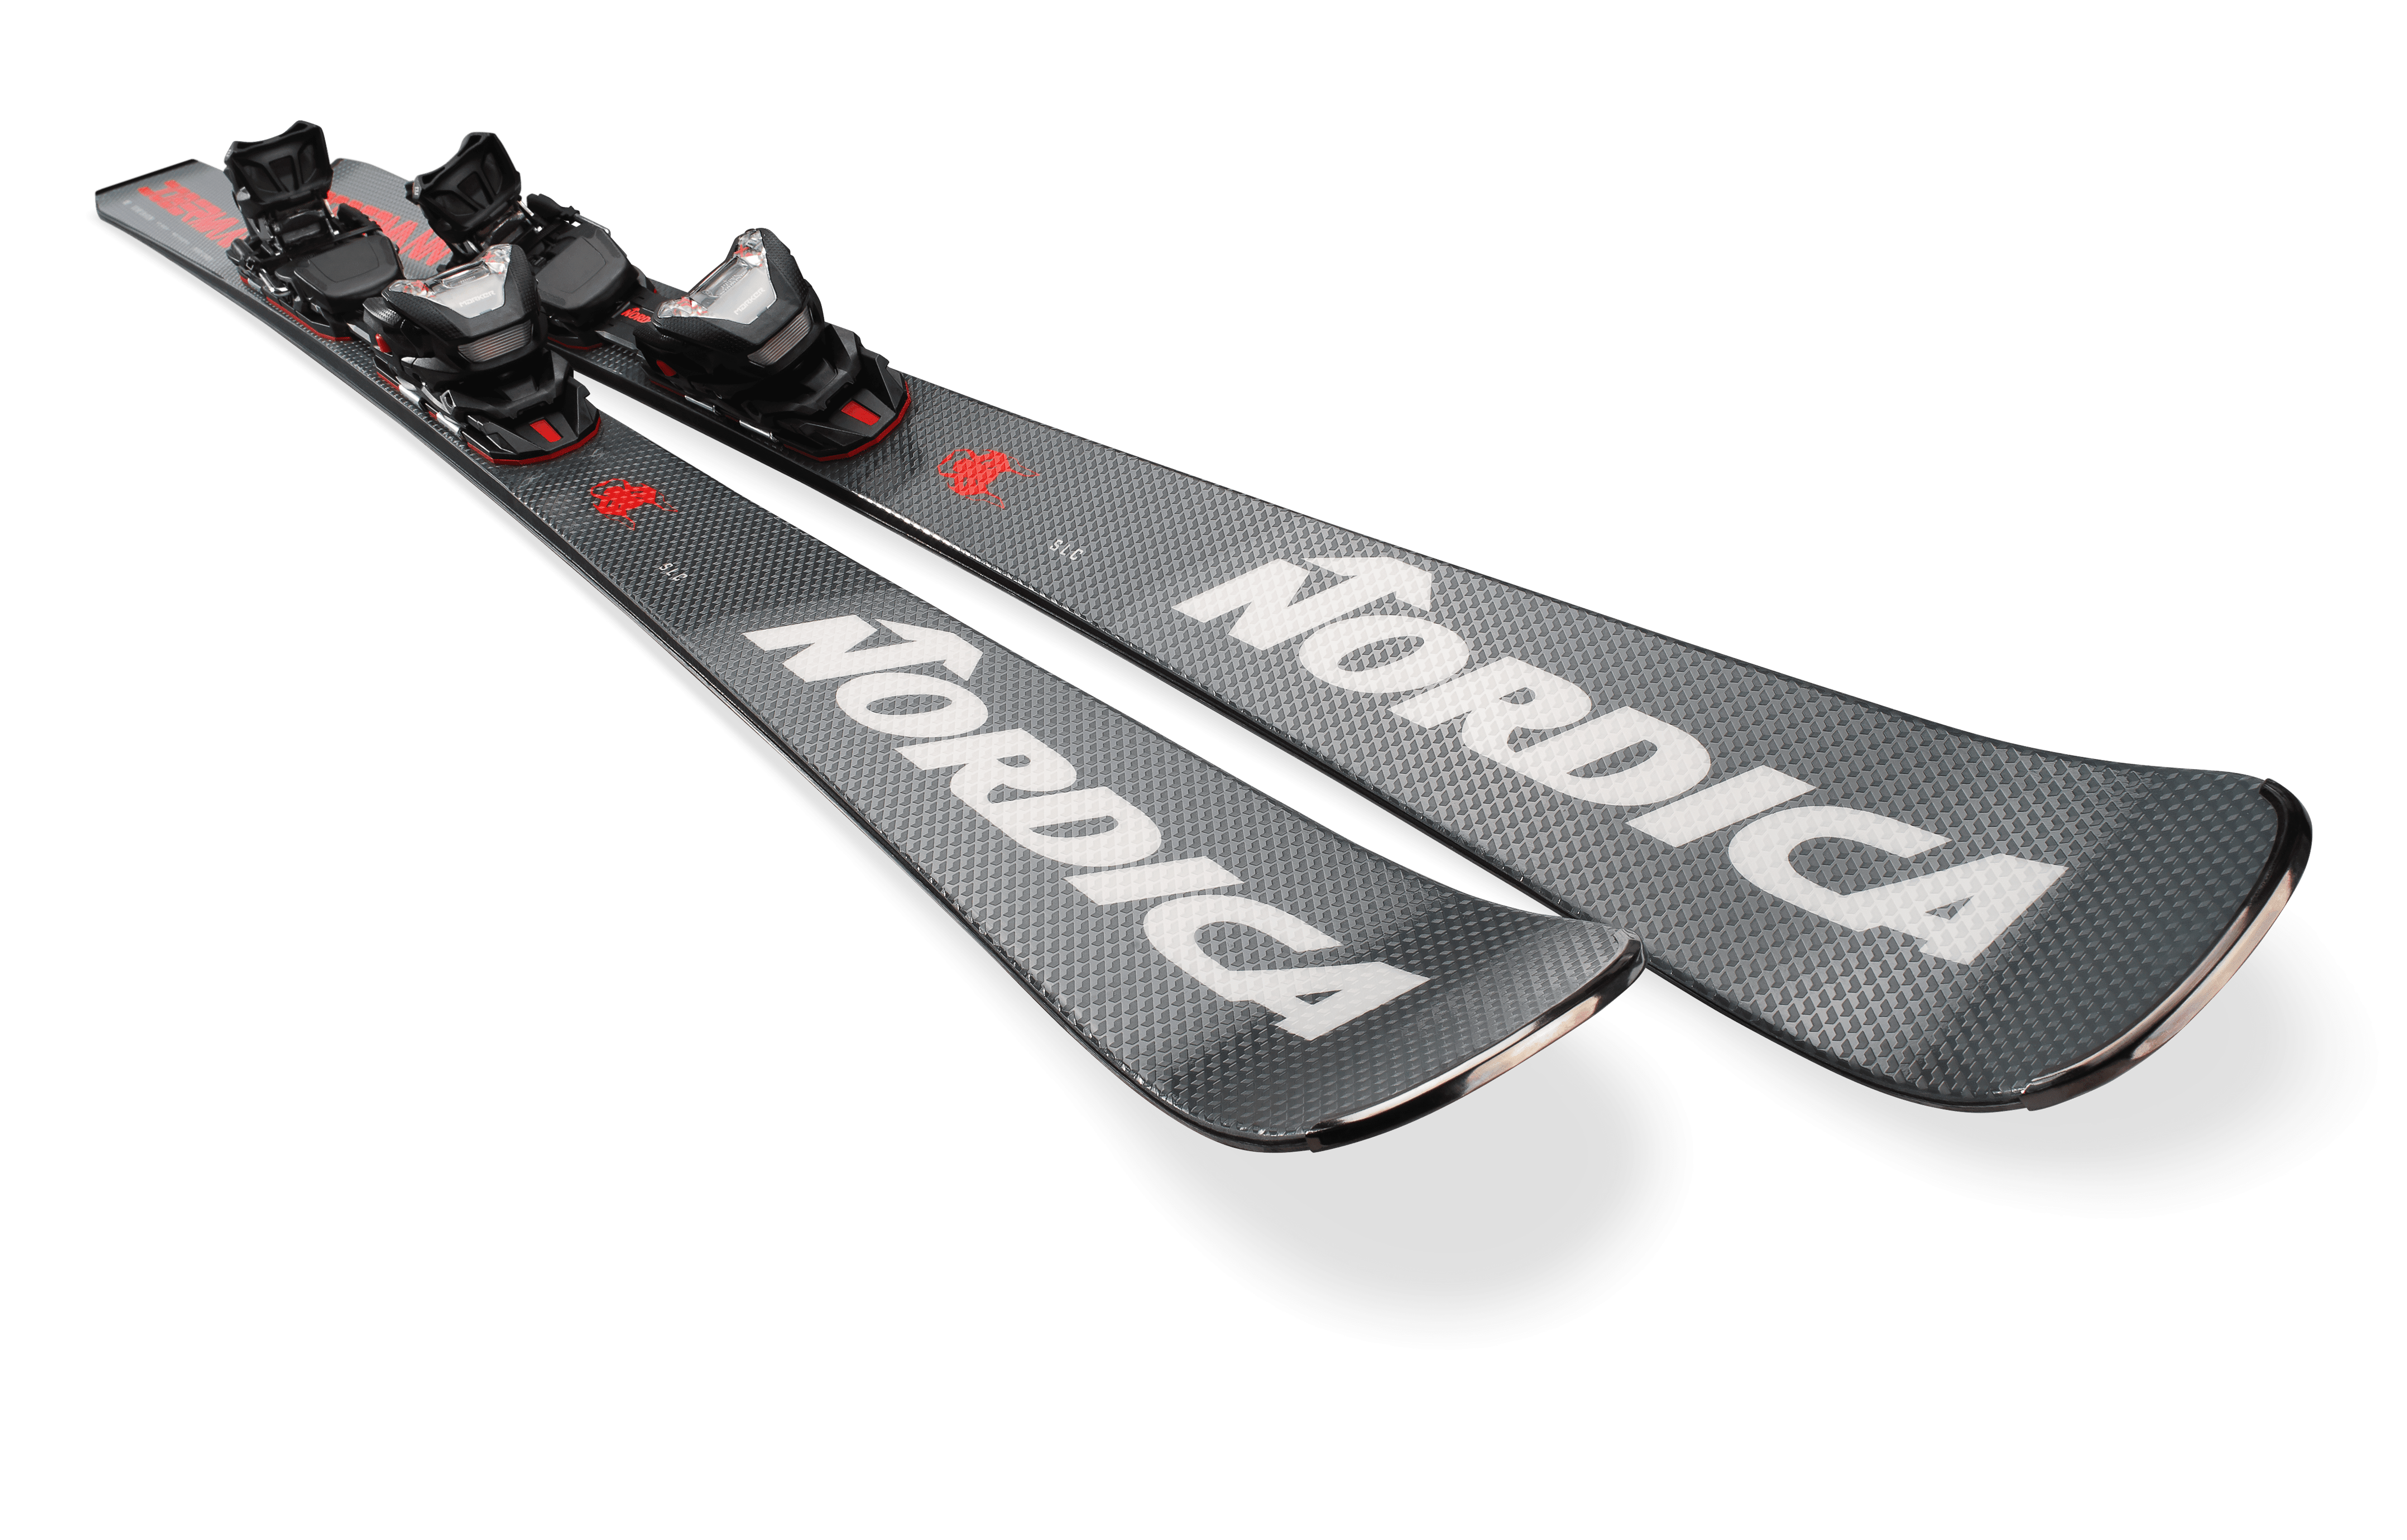 Picture of the Nordica Dobermann slc fdt skis.